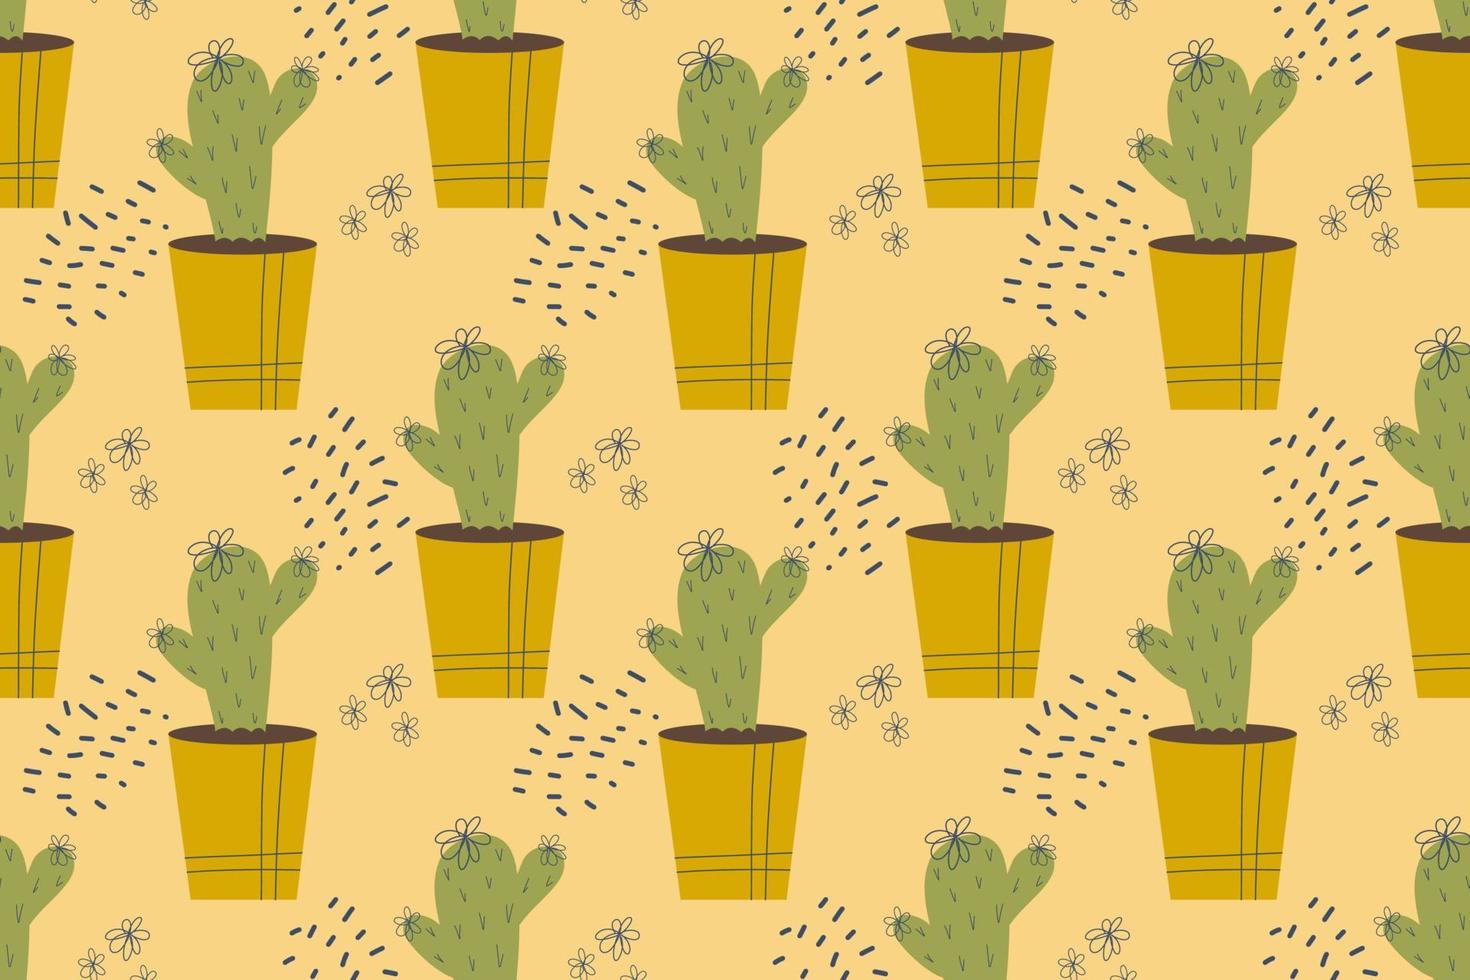 Seamless pattern with cactus. Cactus in a pot, domestic plant with thorns, needles and flowers. Vector illustration in flat style